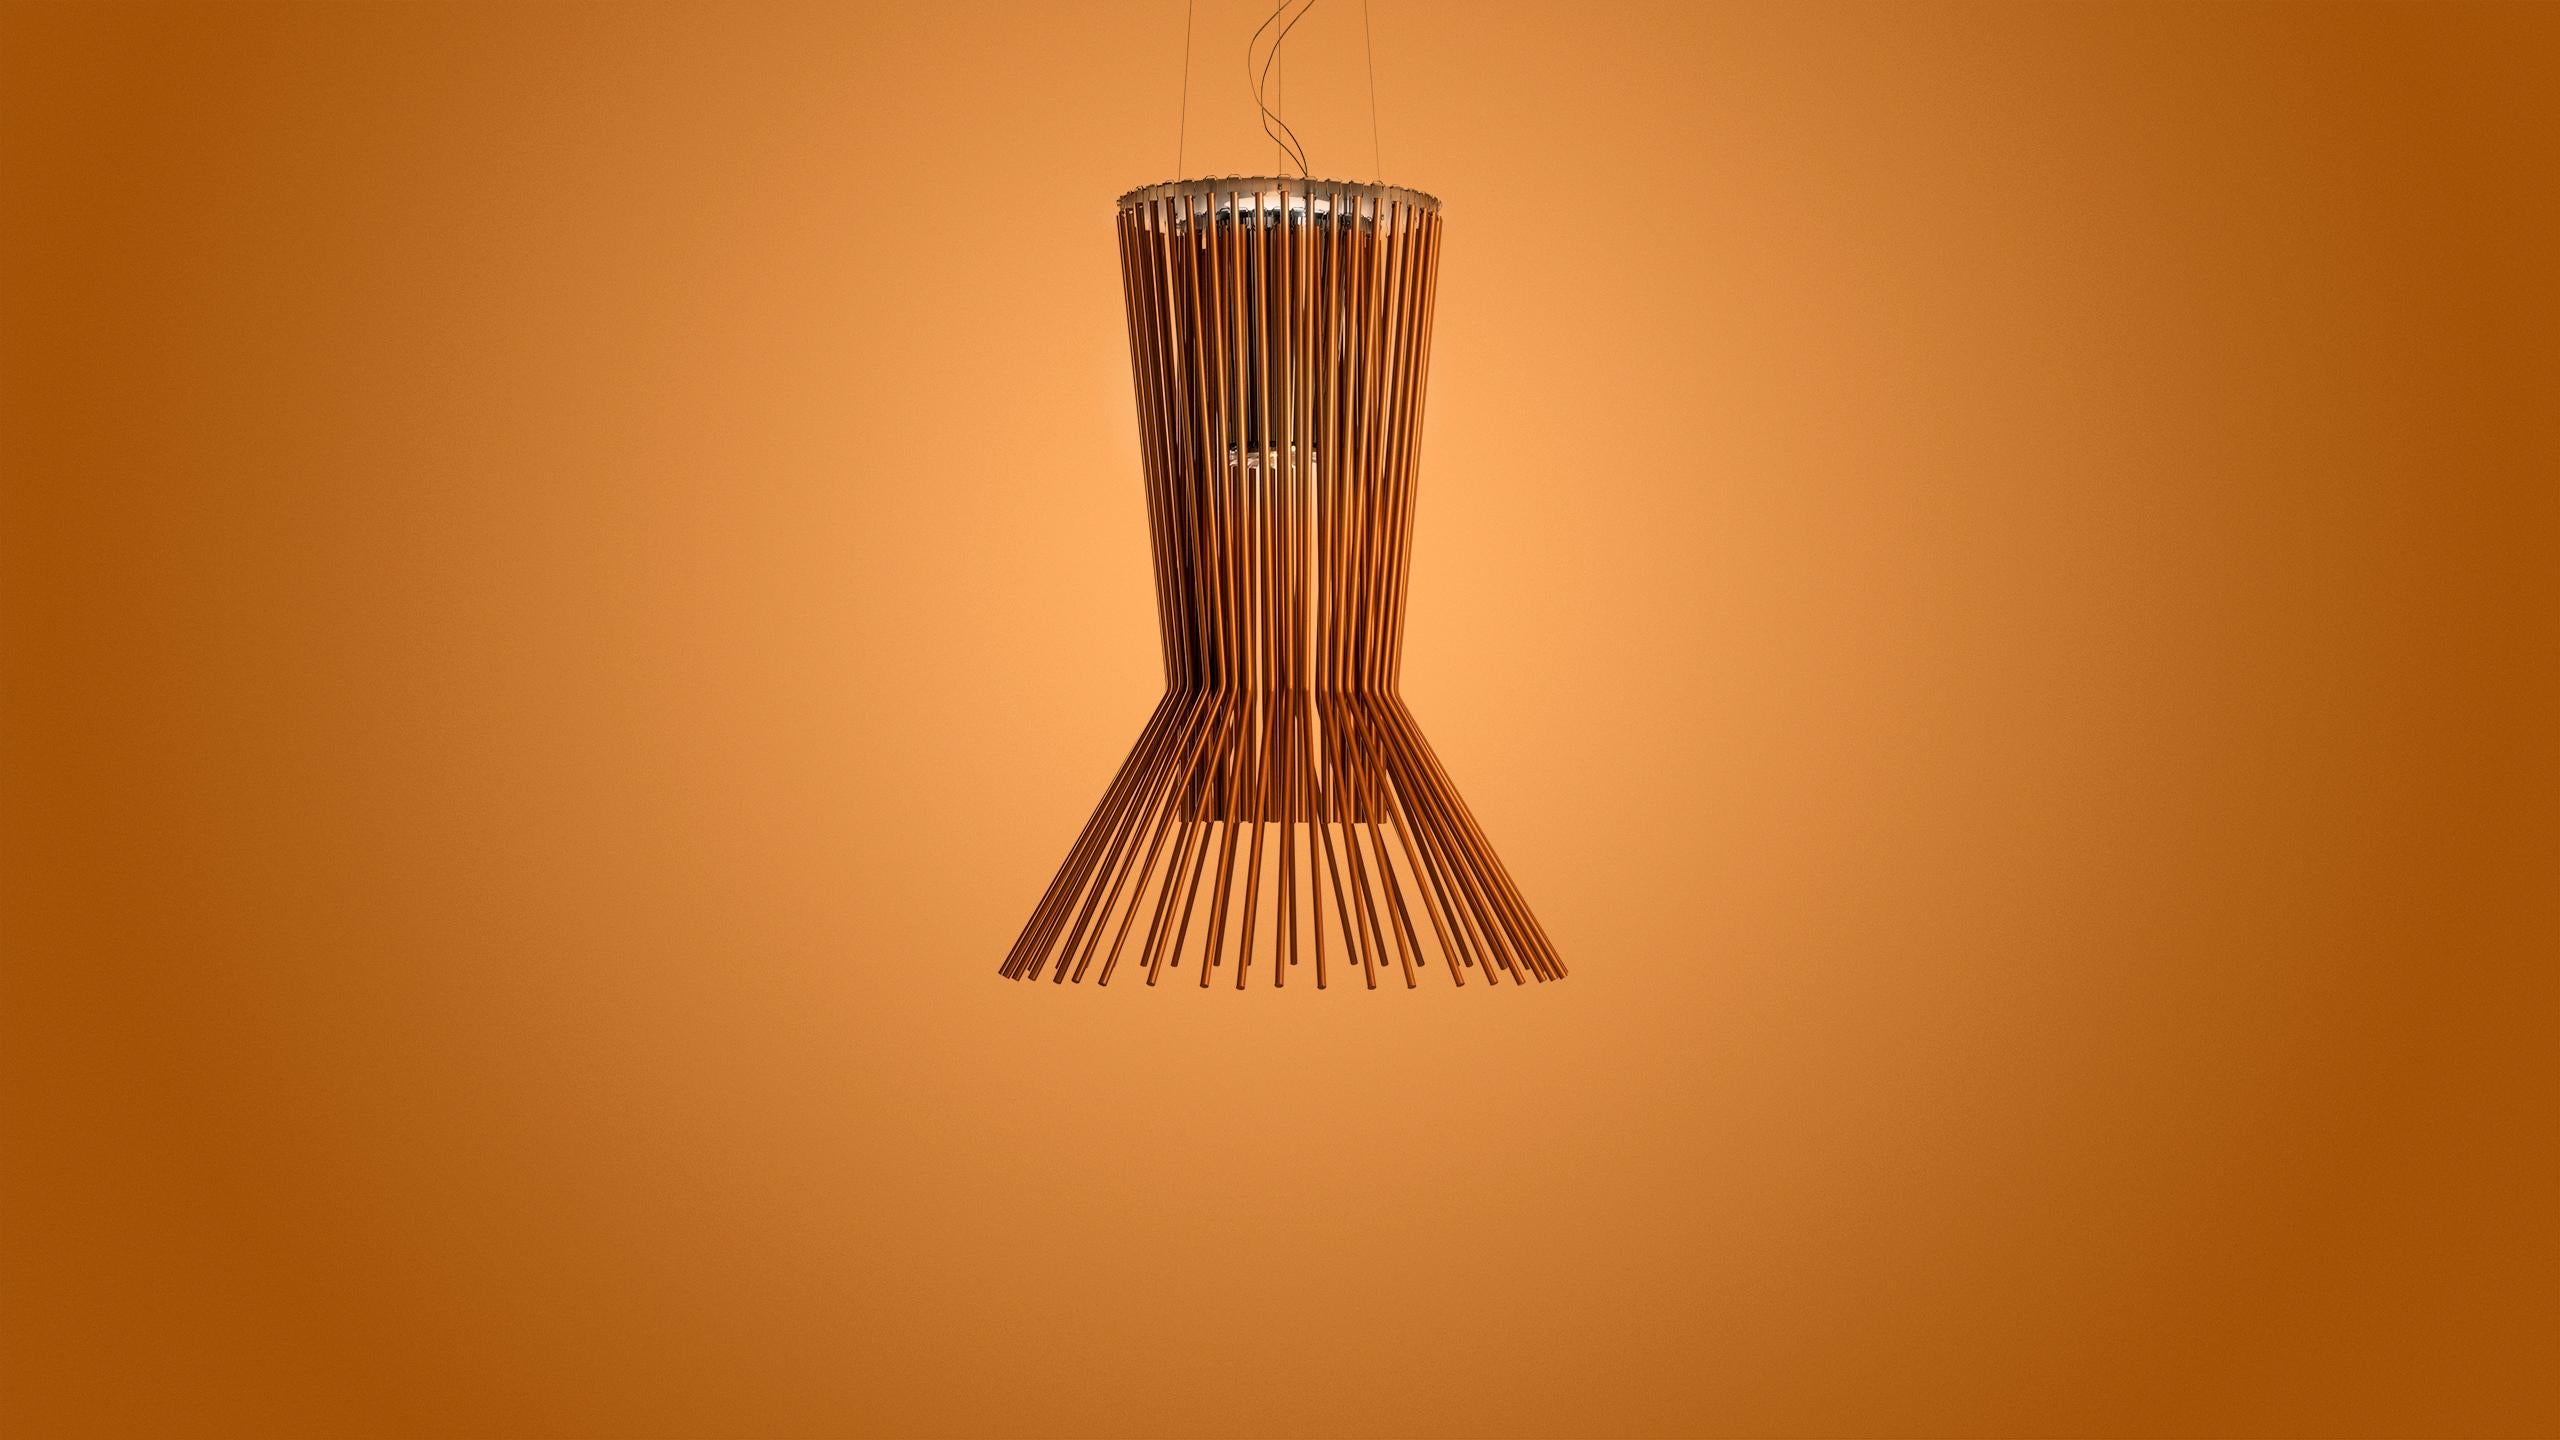 The Allegretto lamps are the result of harmonious, slim silhouettes, which form three-dimensional shapes and games of light and shadow, in three variations on the main theme. High-tech and sprightly, the Allegretto Ritmico suspension lamp boasts a